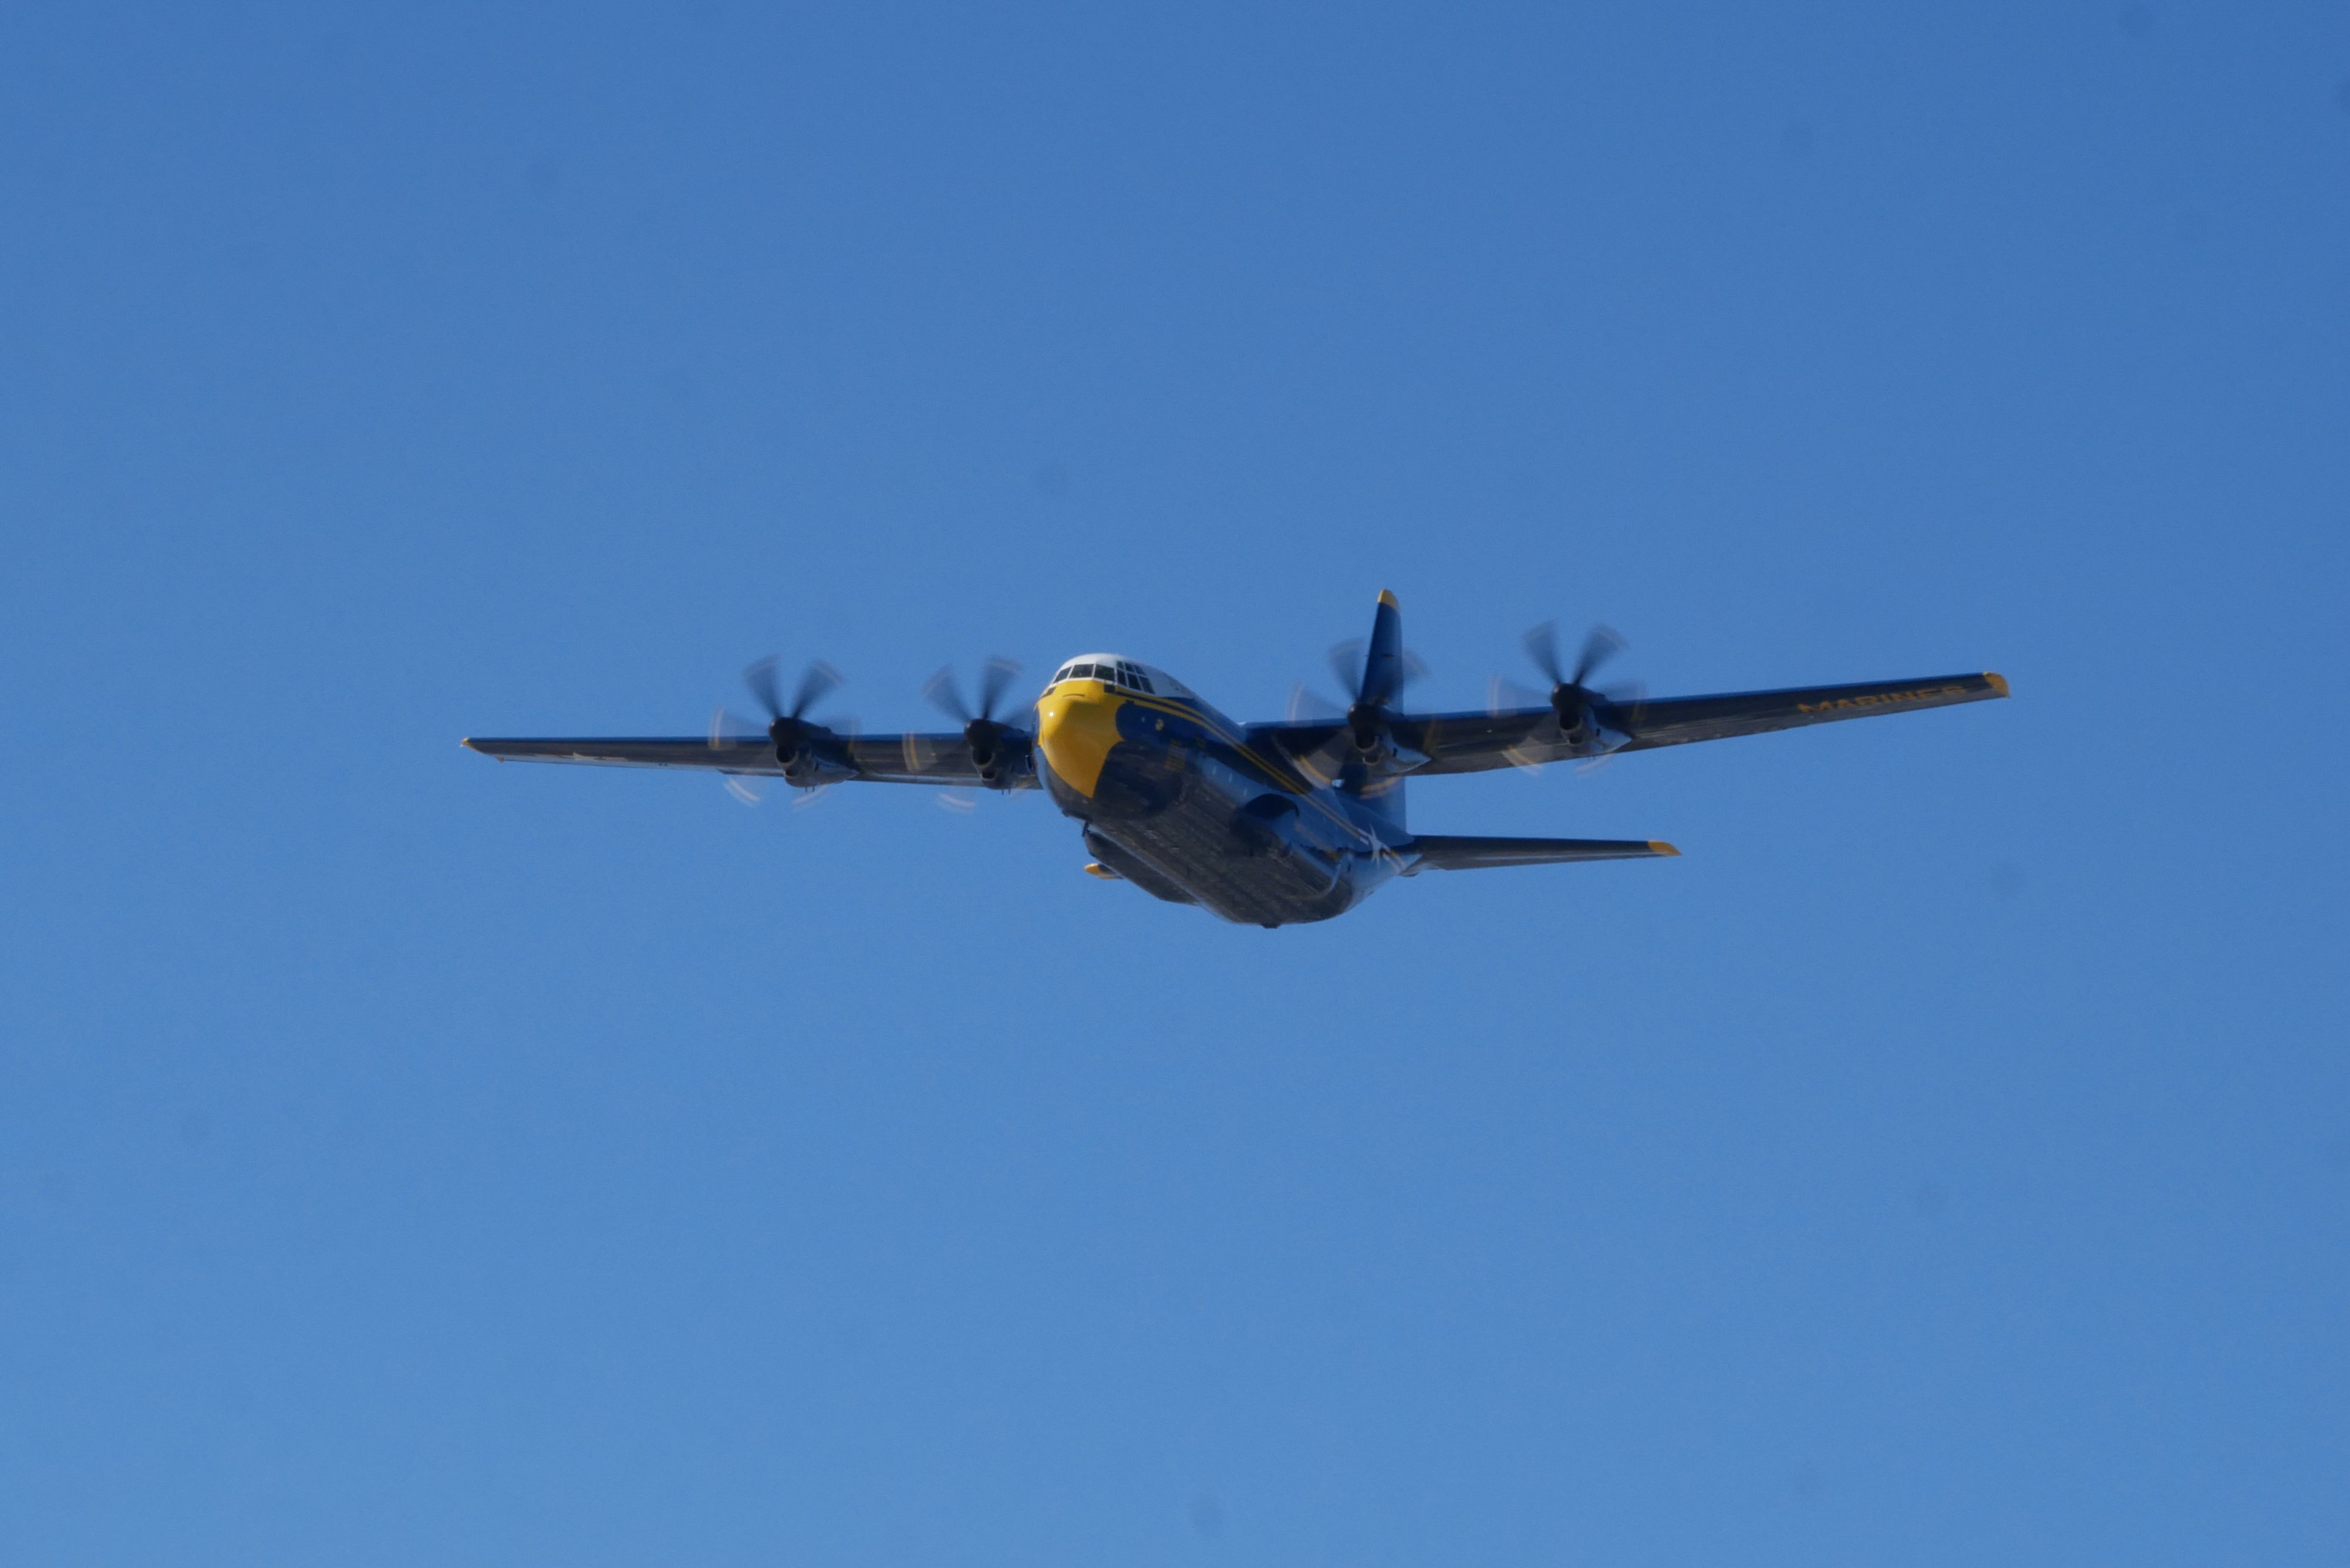 A shot of a large blue plane flying.